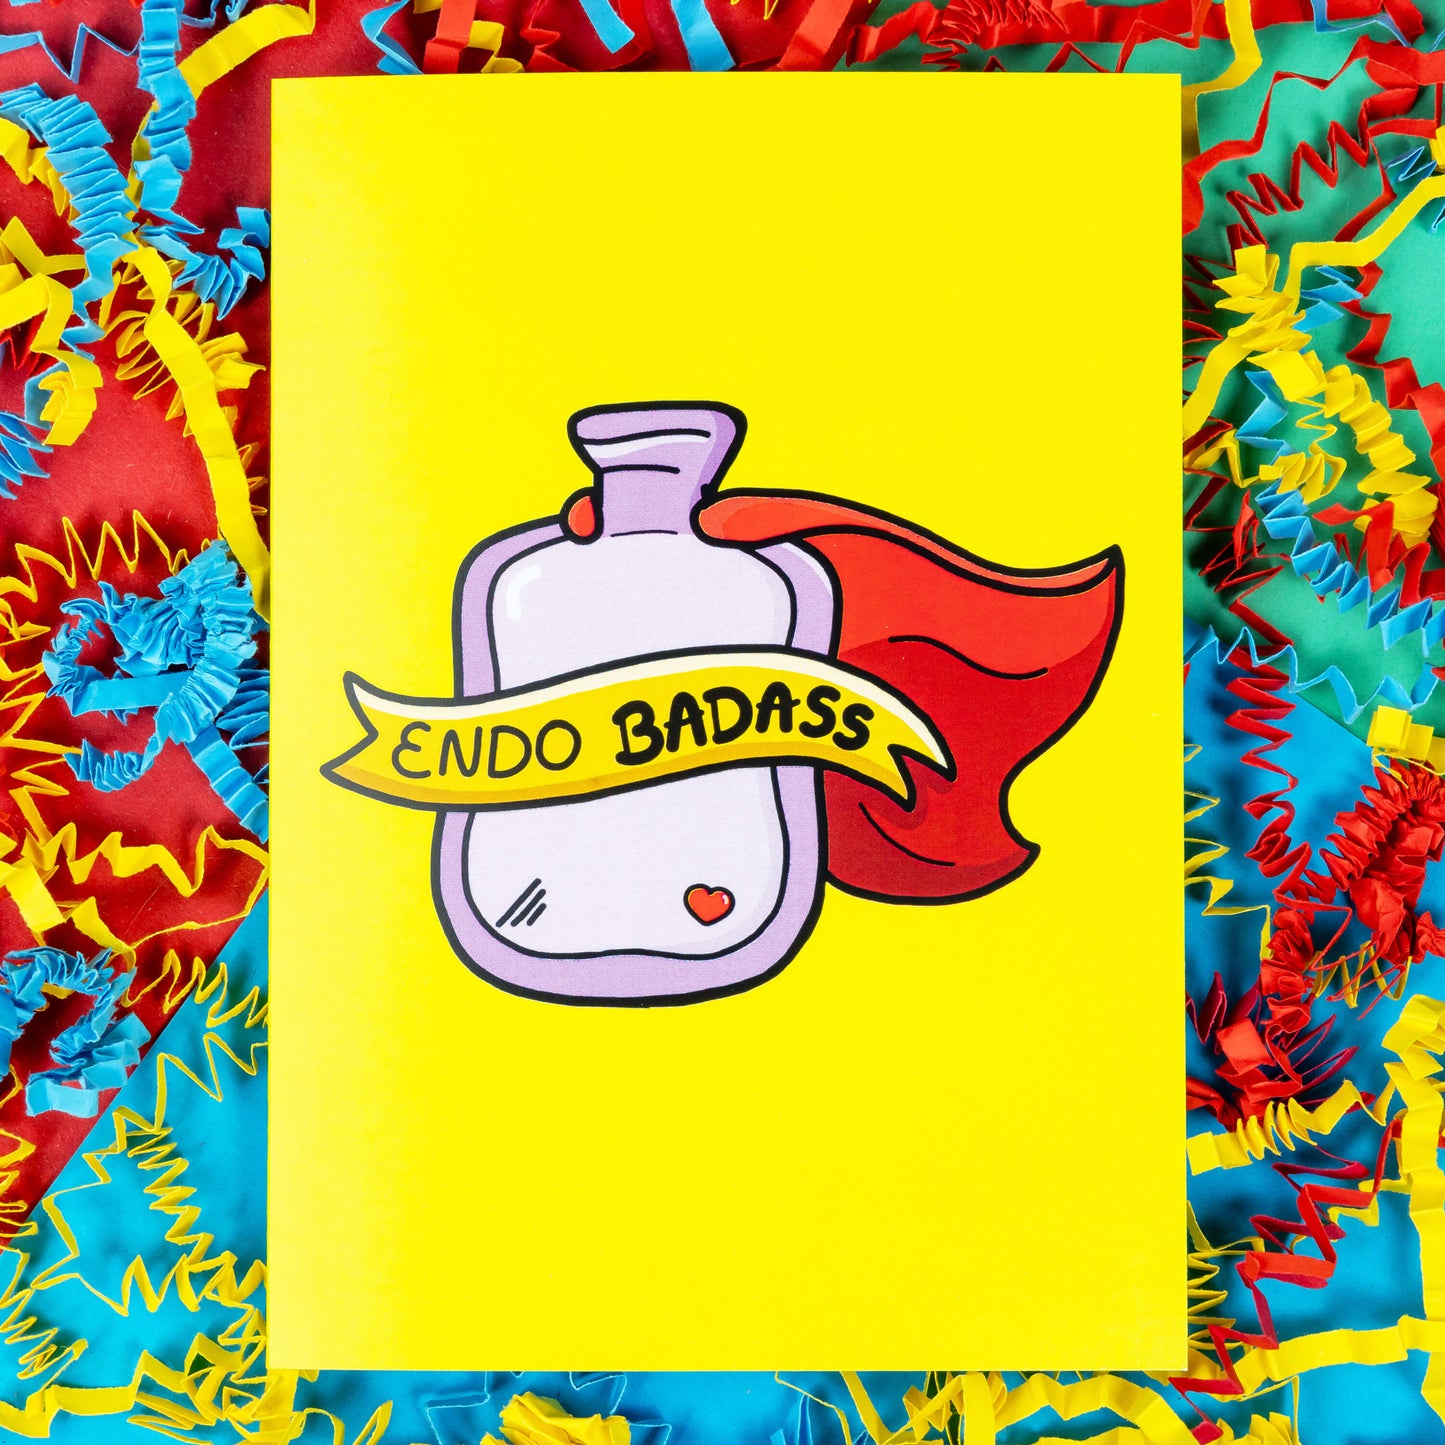 The Endo Badass Card - Endometriosis on a red, blue and green background with yellow, blue and red crinkle card confetti. The yellow based card features a pink hot waterbottle with a small red heart, a red cape and a yellow banner across reading 'endo badass'. Hand drawn design is raising awareness for Endometriosis and pelvic pain.